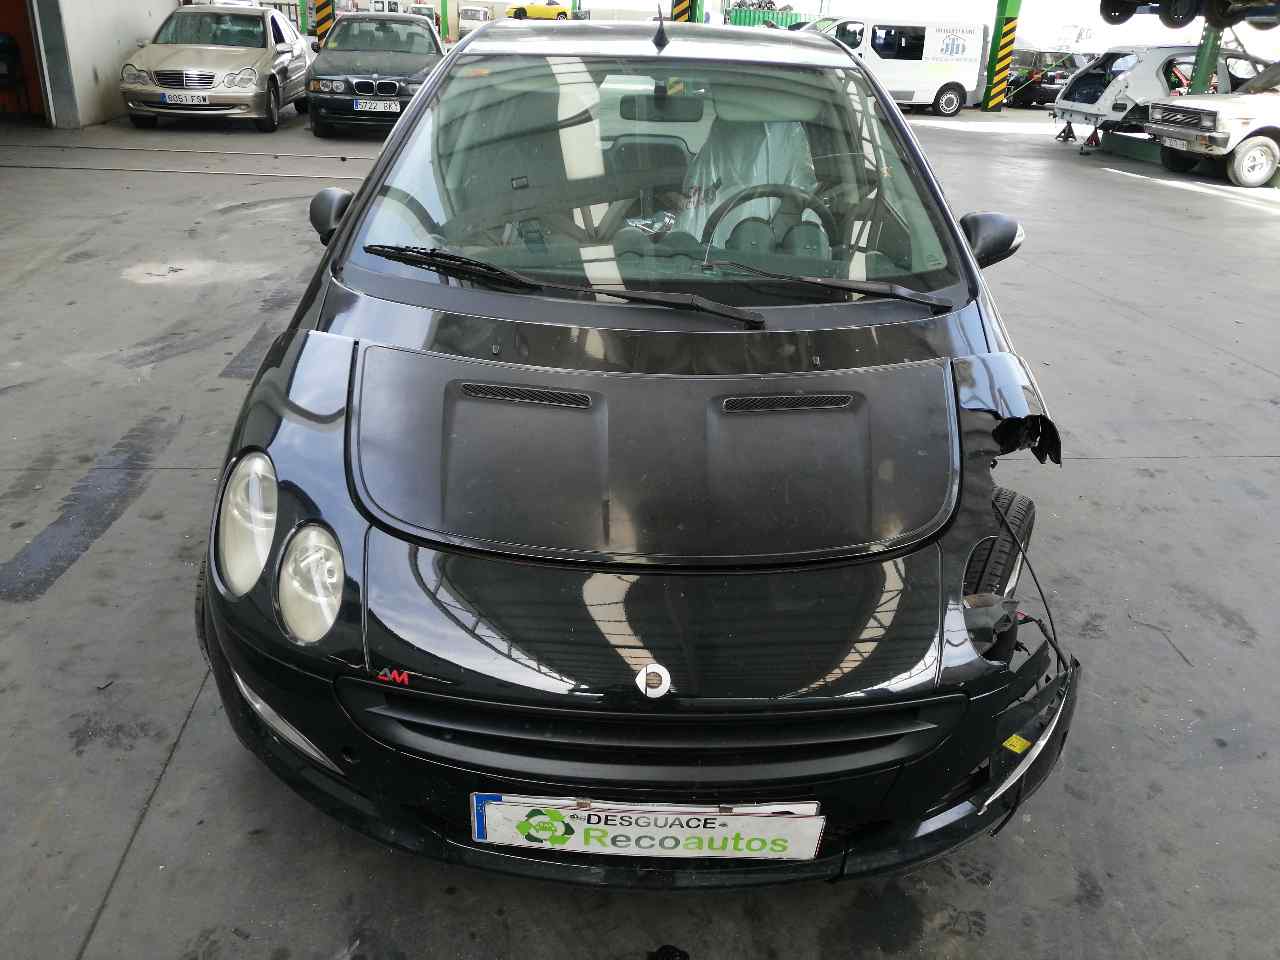 SMART Forfour 1 generation (2004-2006) Other Interior Parts A4547600061, MN900108, 5PUERTAS 19913146